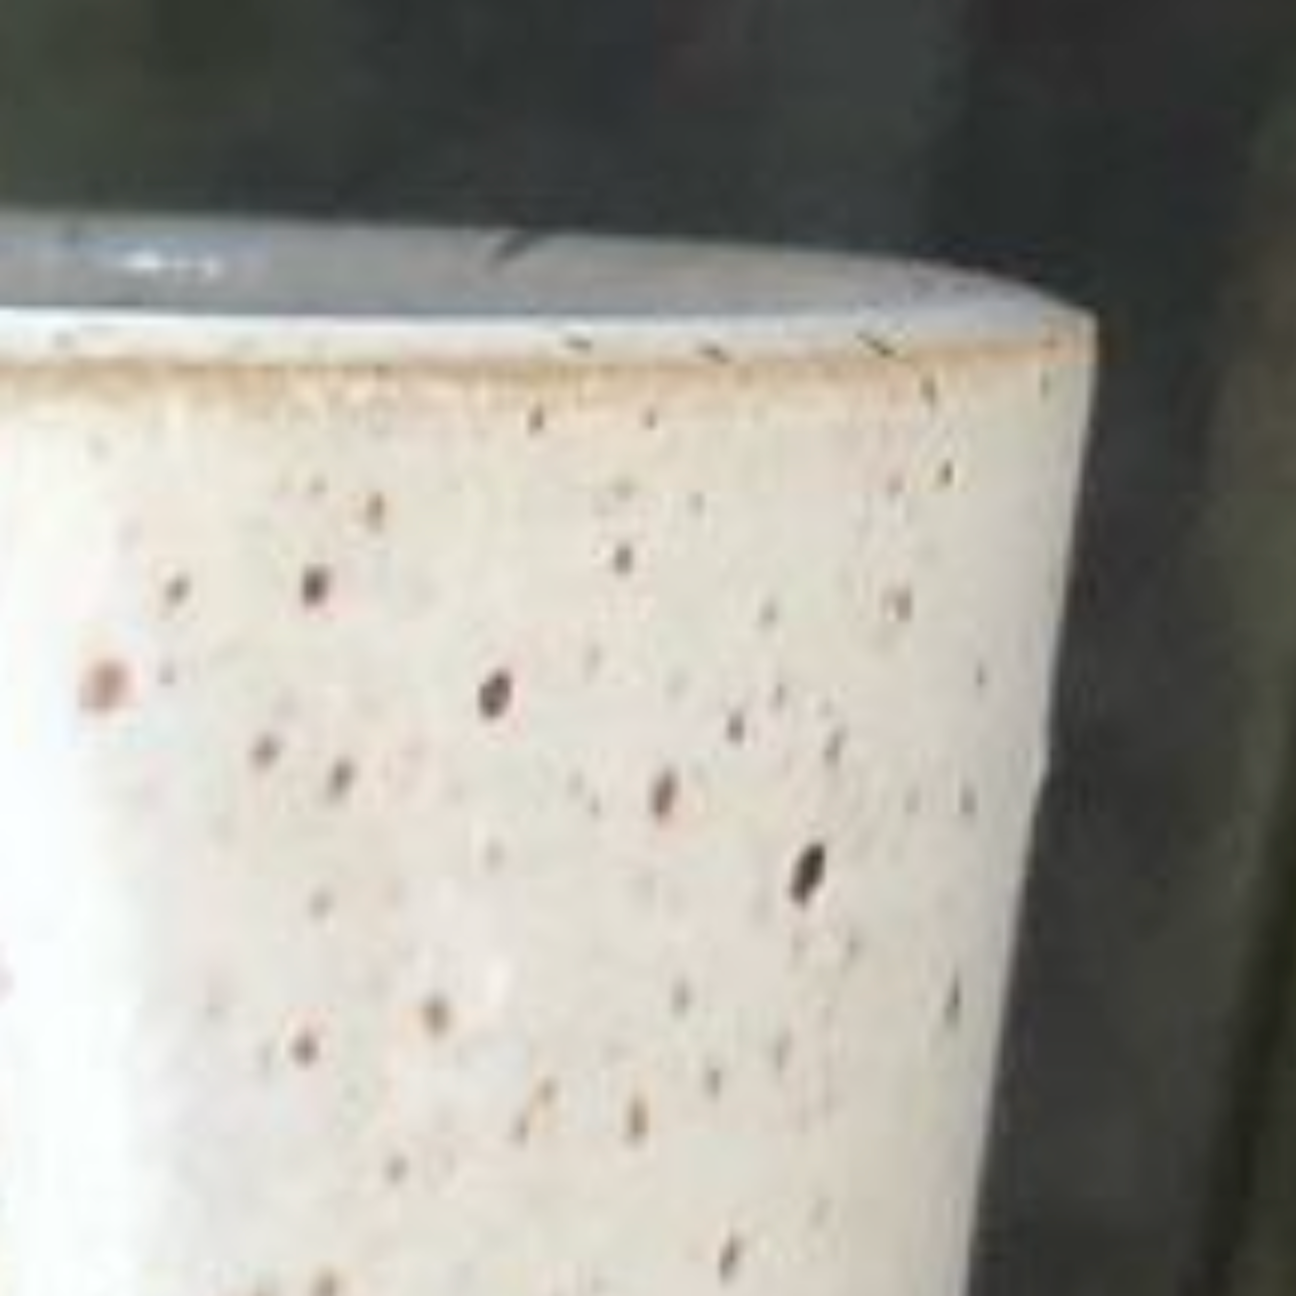 Speckled Clay Isabelline Candle Collection - Hand Thrown Planter Pots